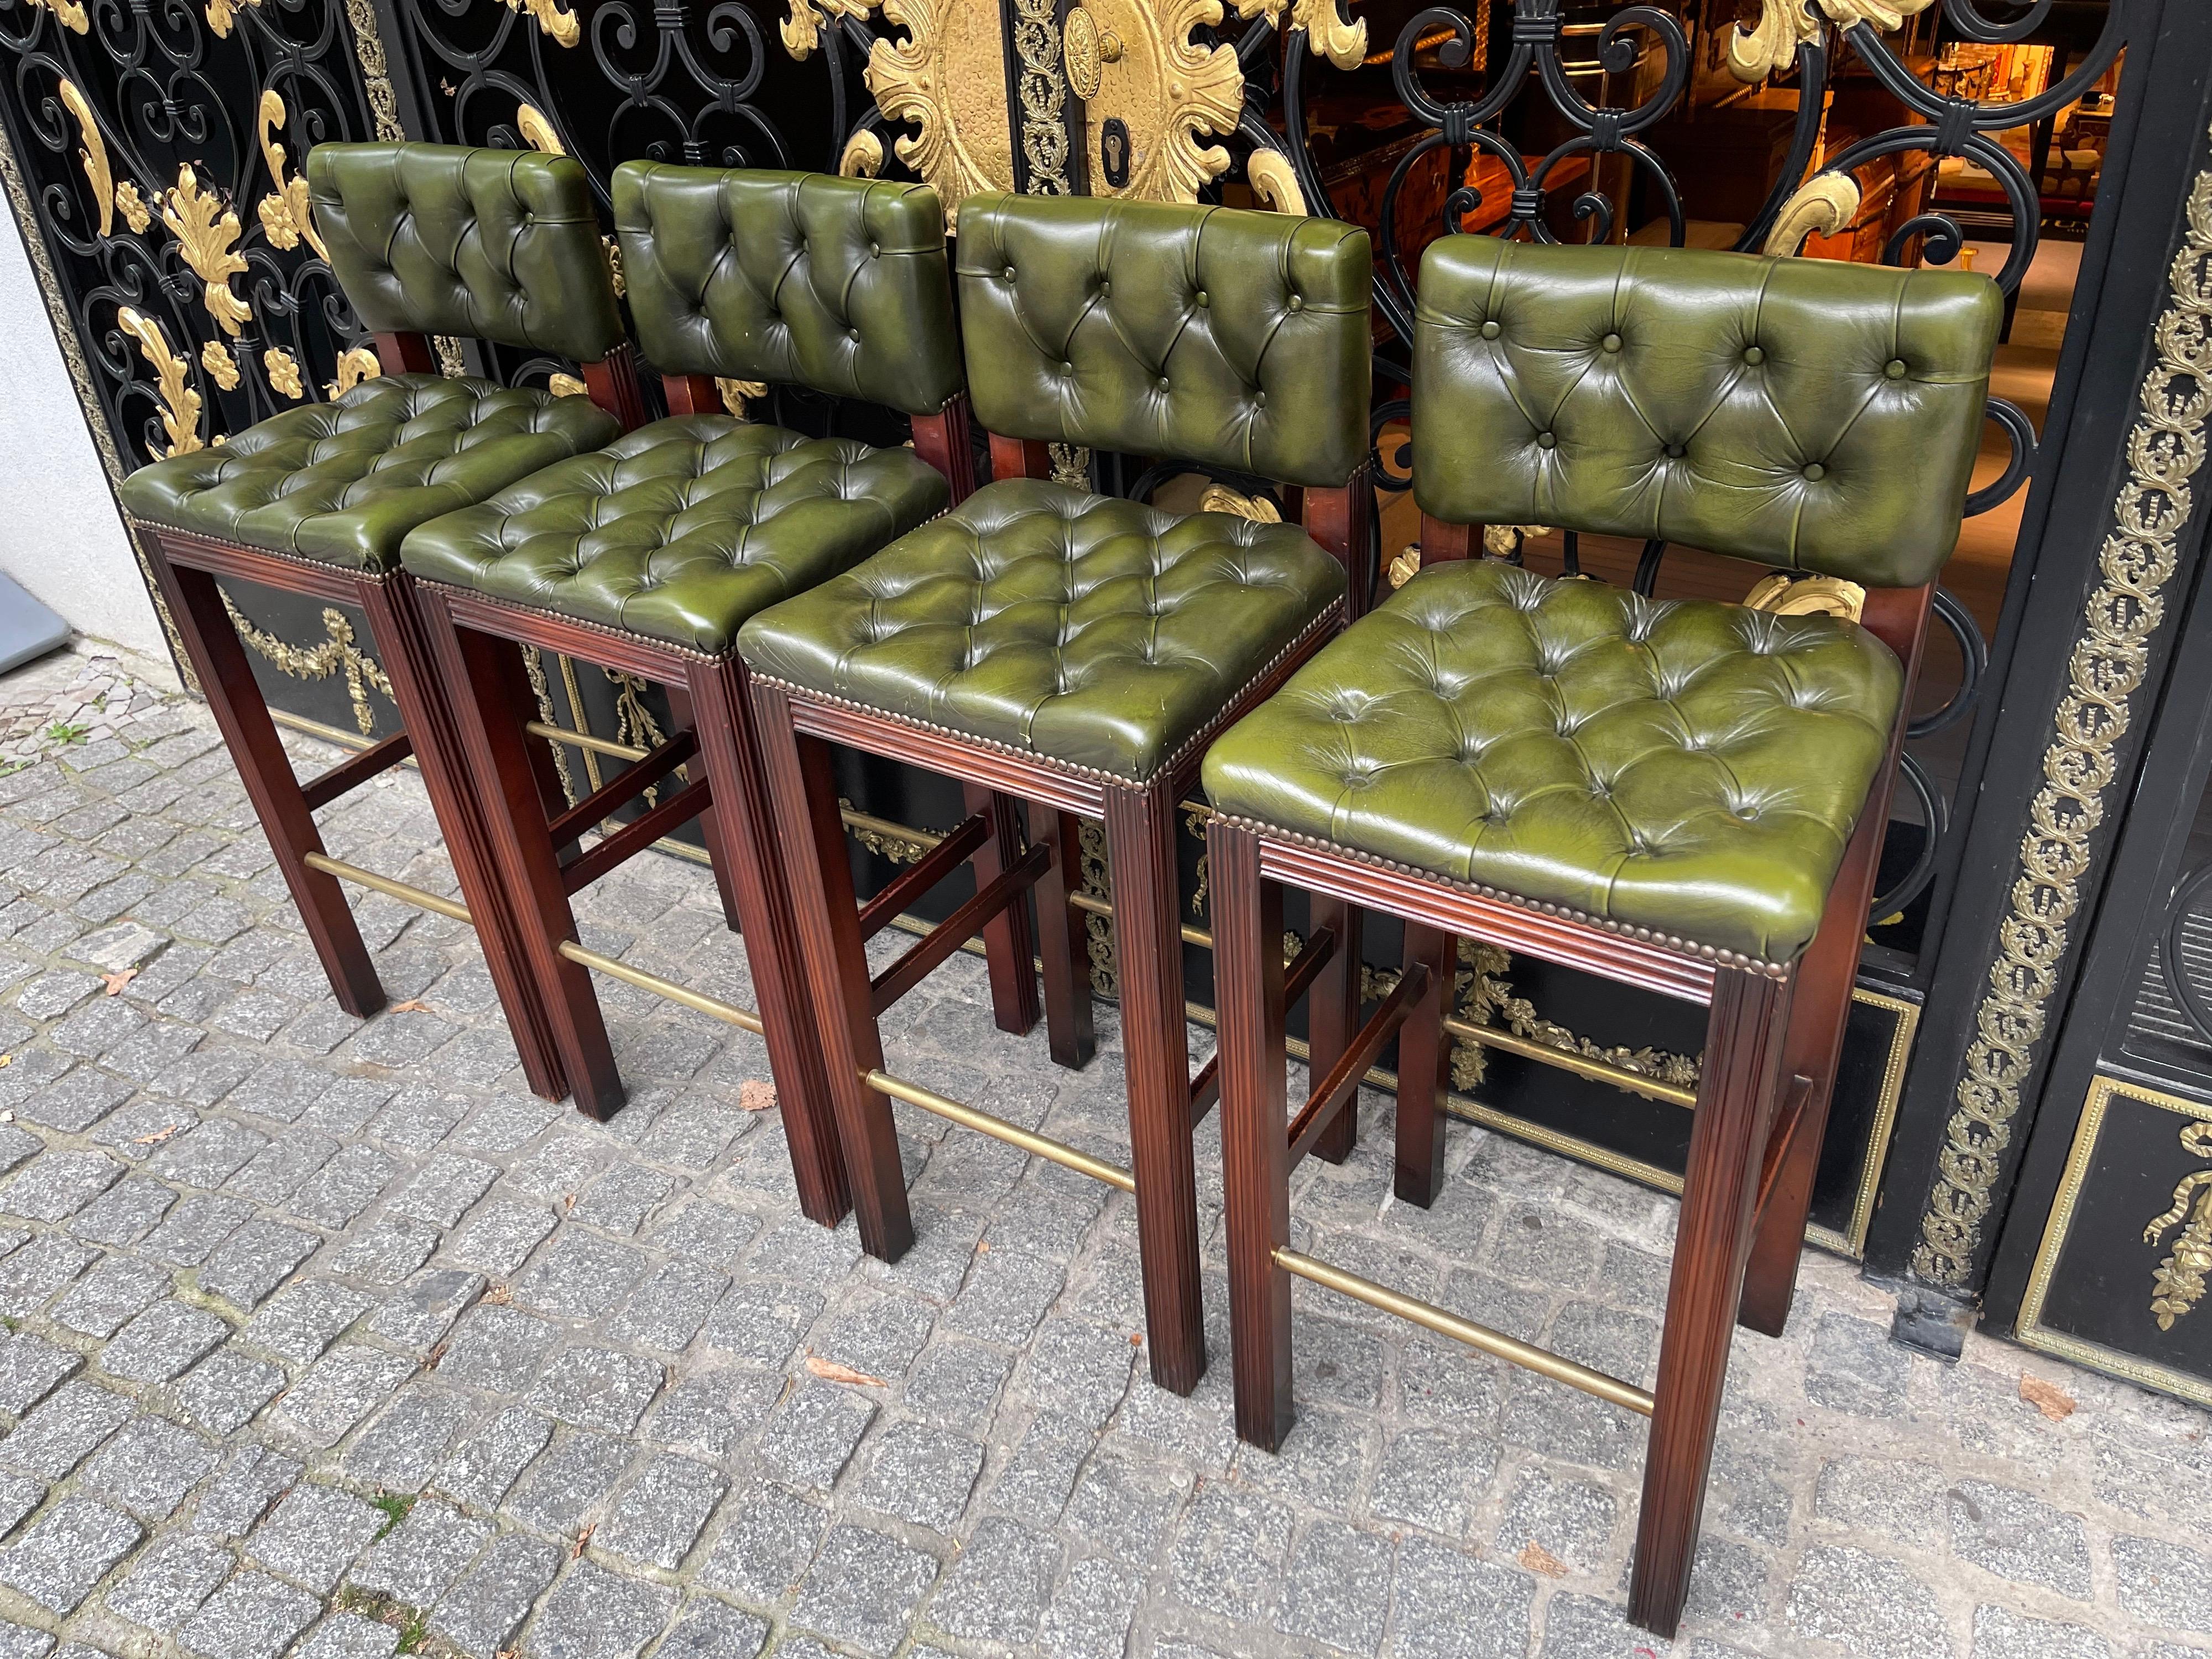 Painted Set of 4 English Chesterfield Bar Stools, 20th Century